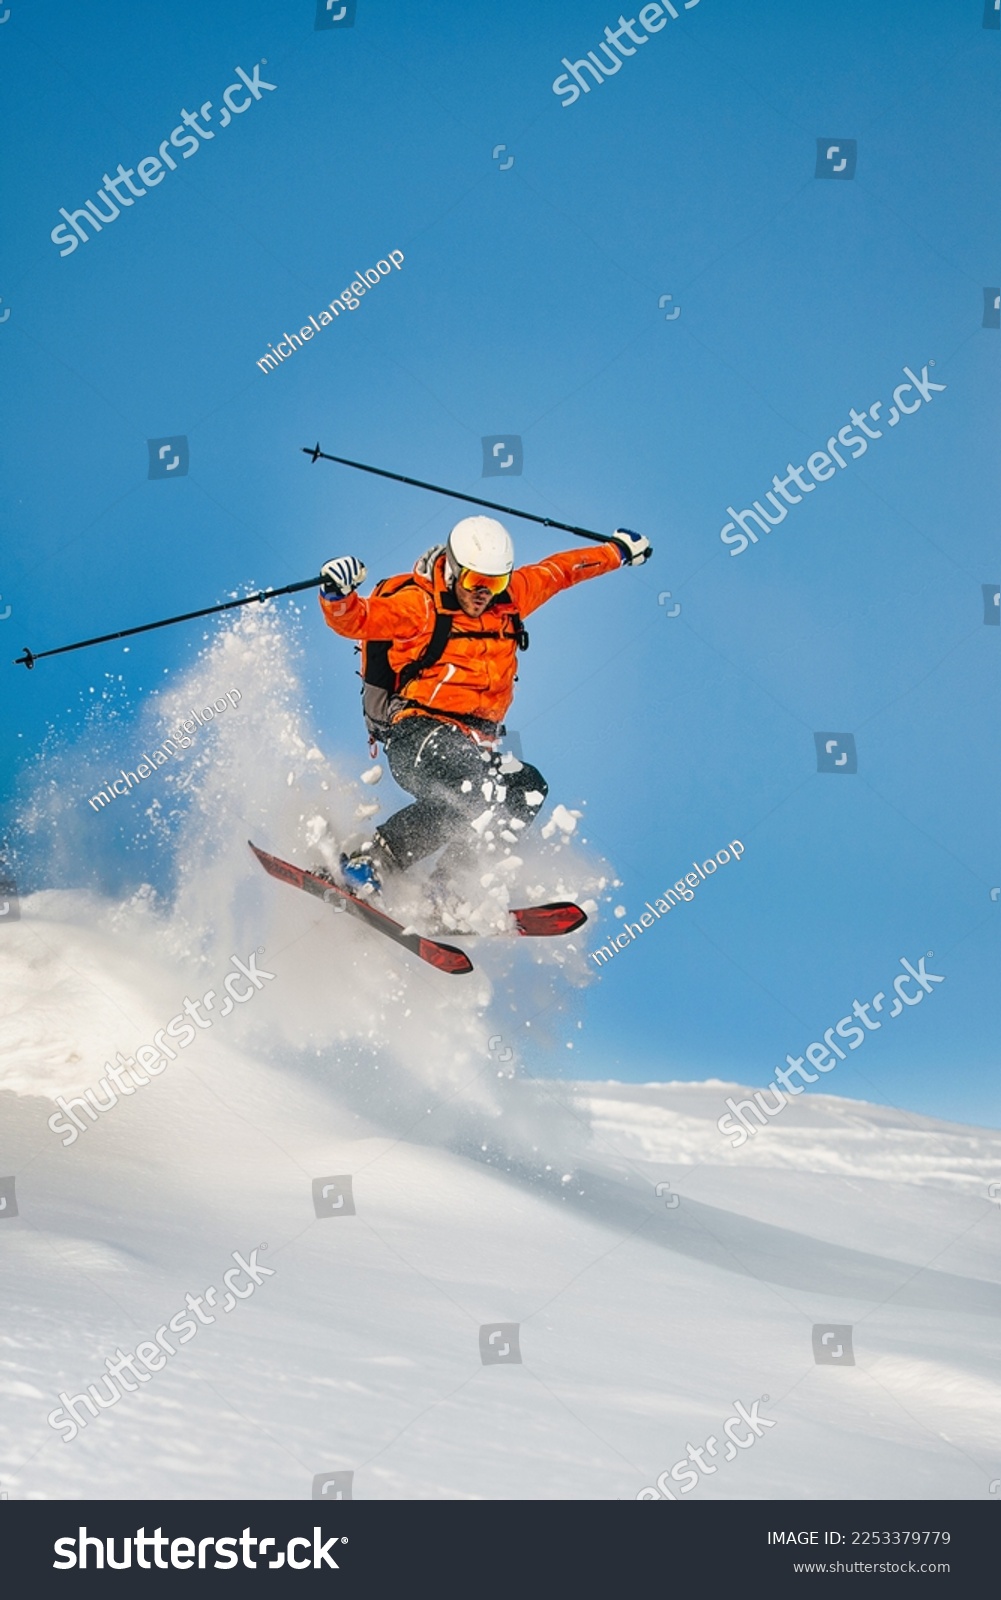 Free-rider skier jumps and has fun in powder snow #2253379779